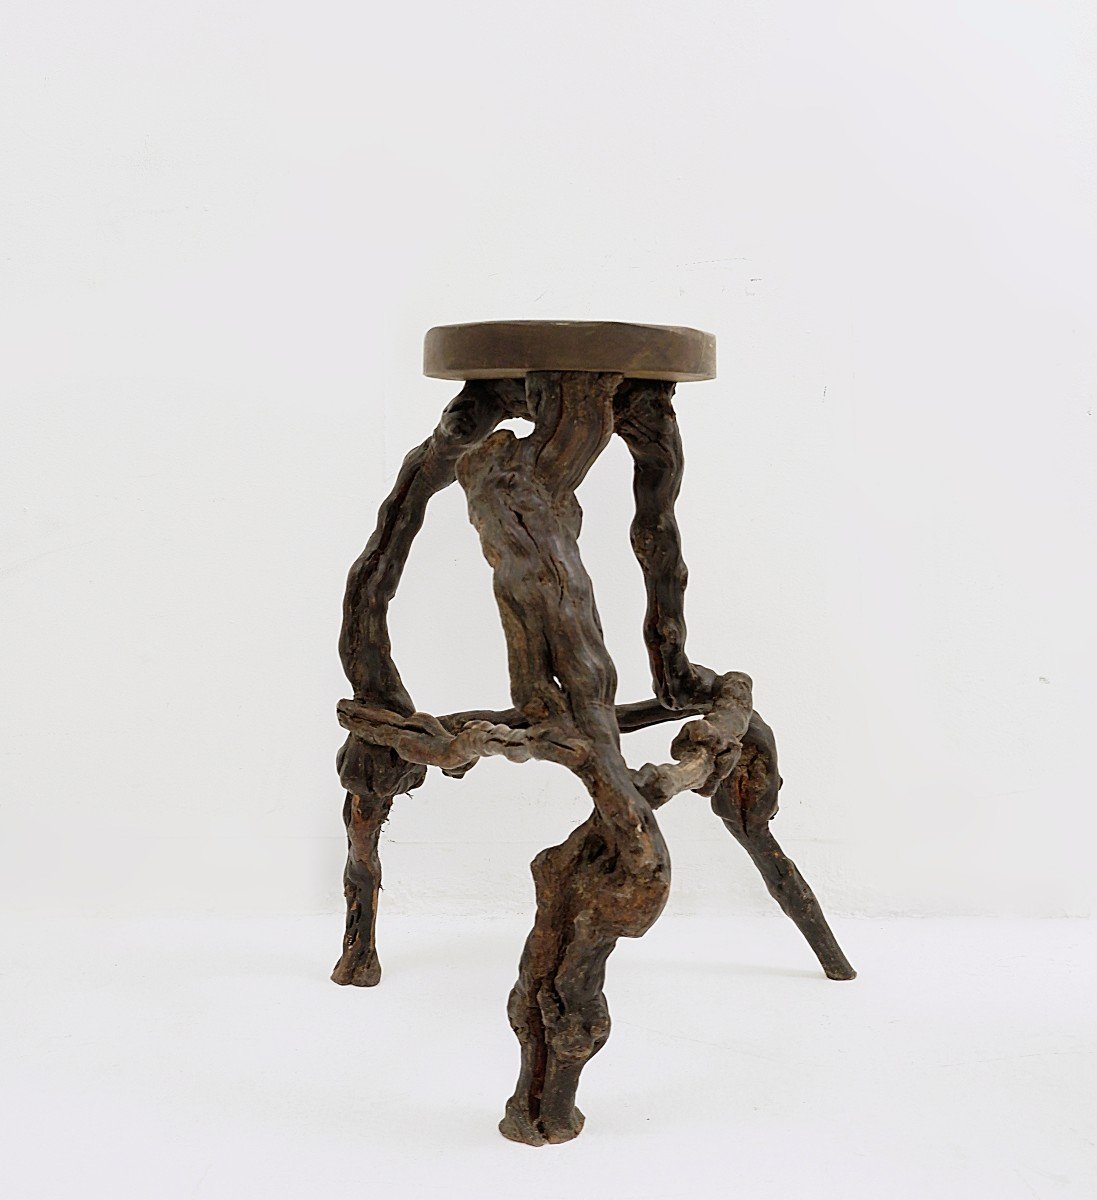 Primitive Stools With Round Slab Seat And Legs Constructed From Vines - Set Of 4-photo-4